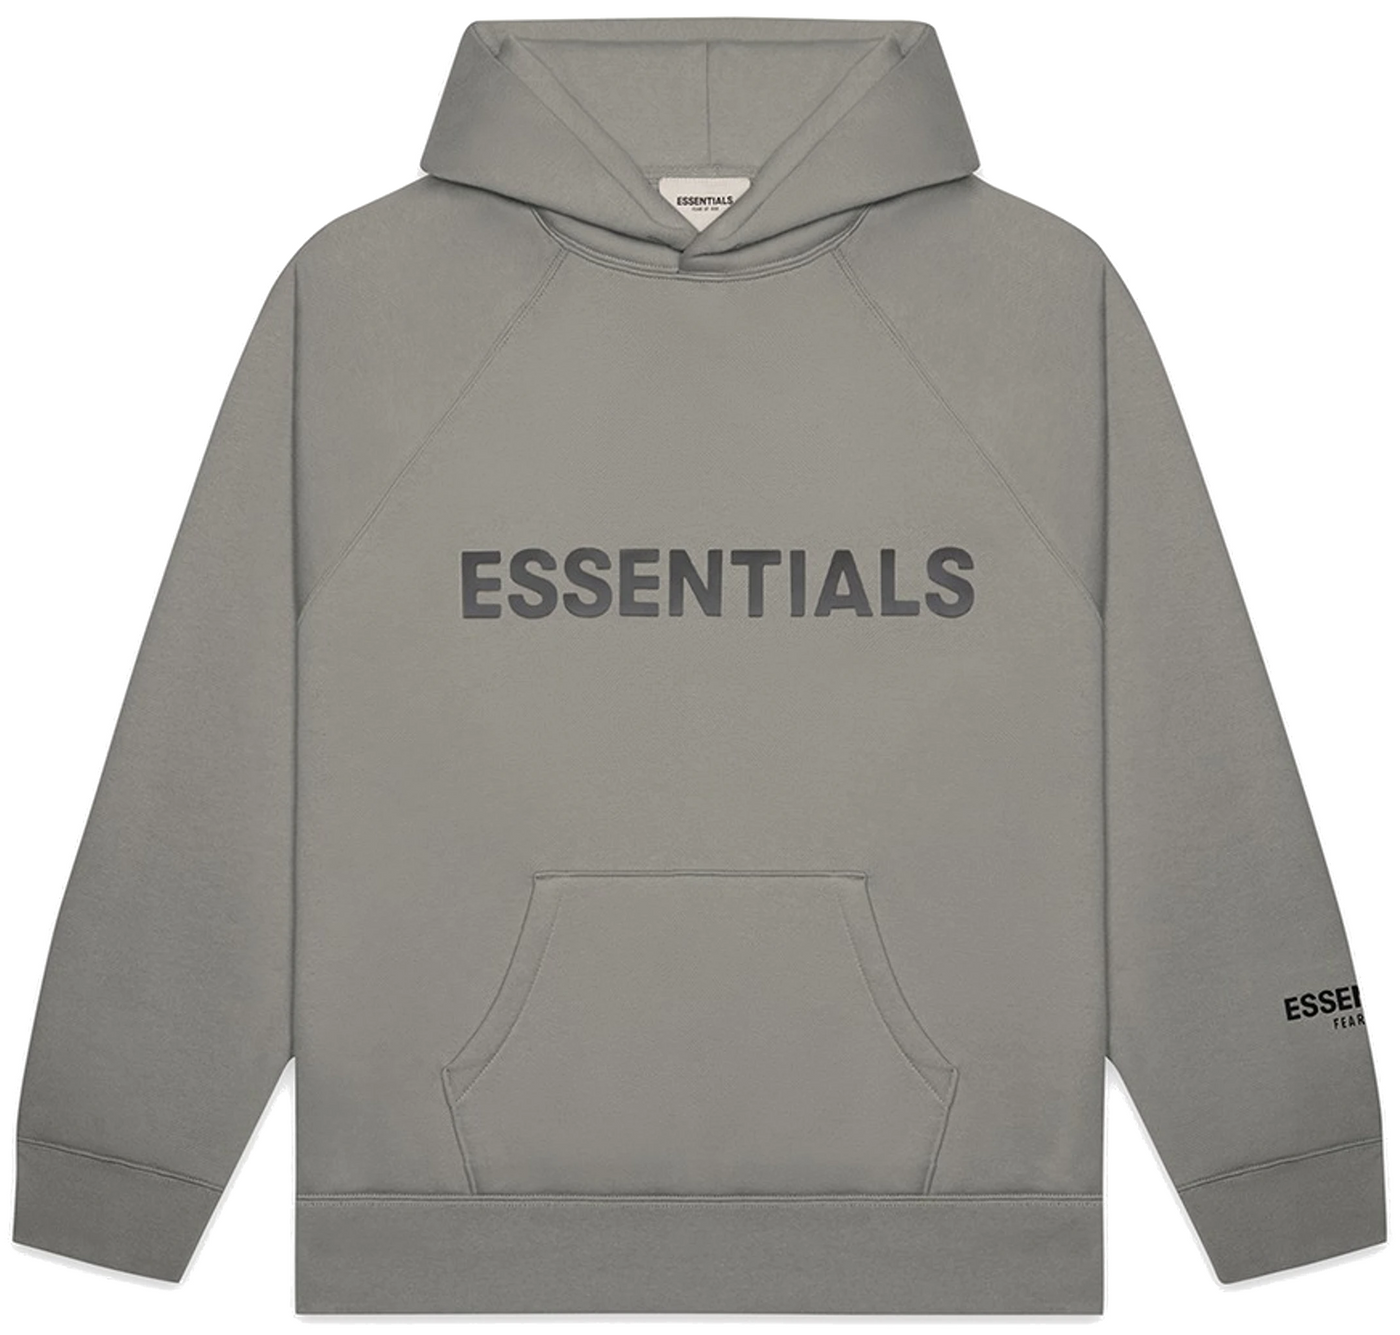 FEAR OF GOD Essentials hoodie charcoal